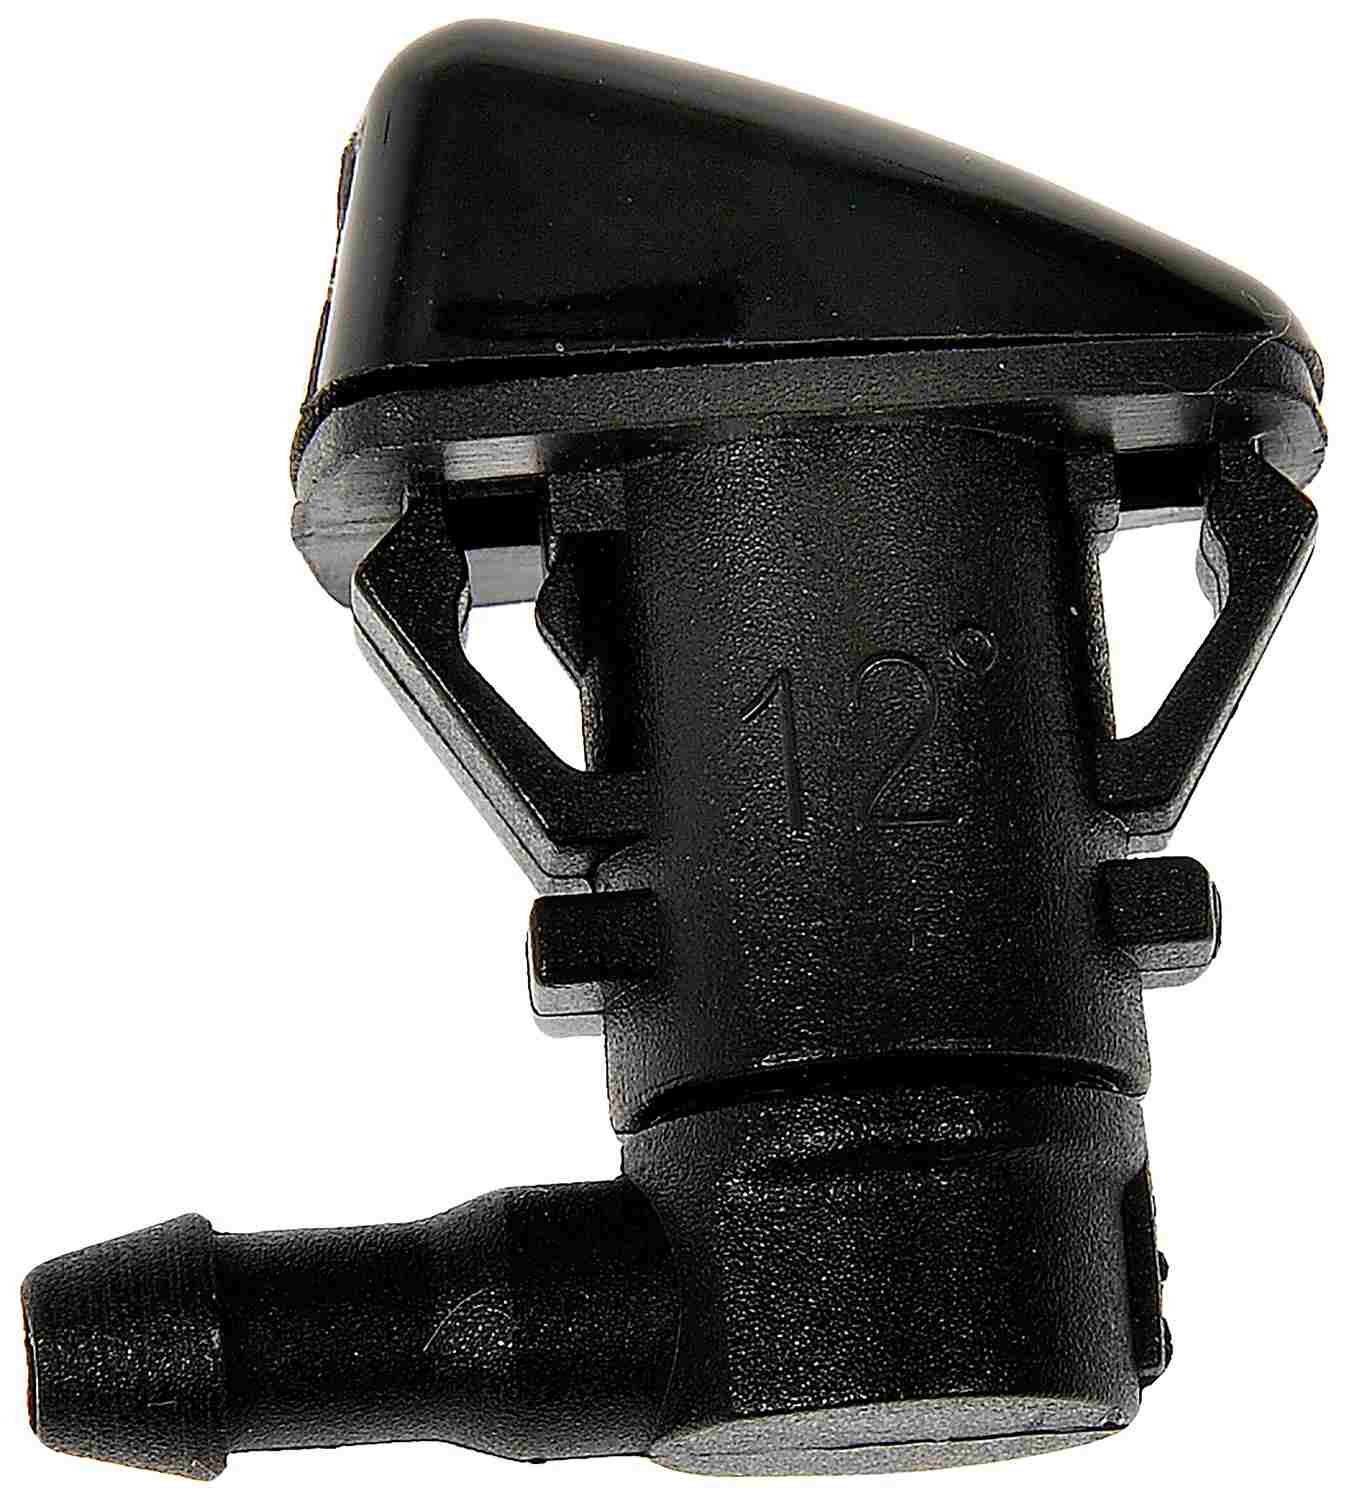 Back View of Left Windshield Washer Nozzle MOTORMITE 58081